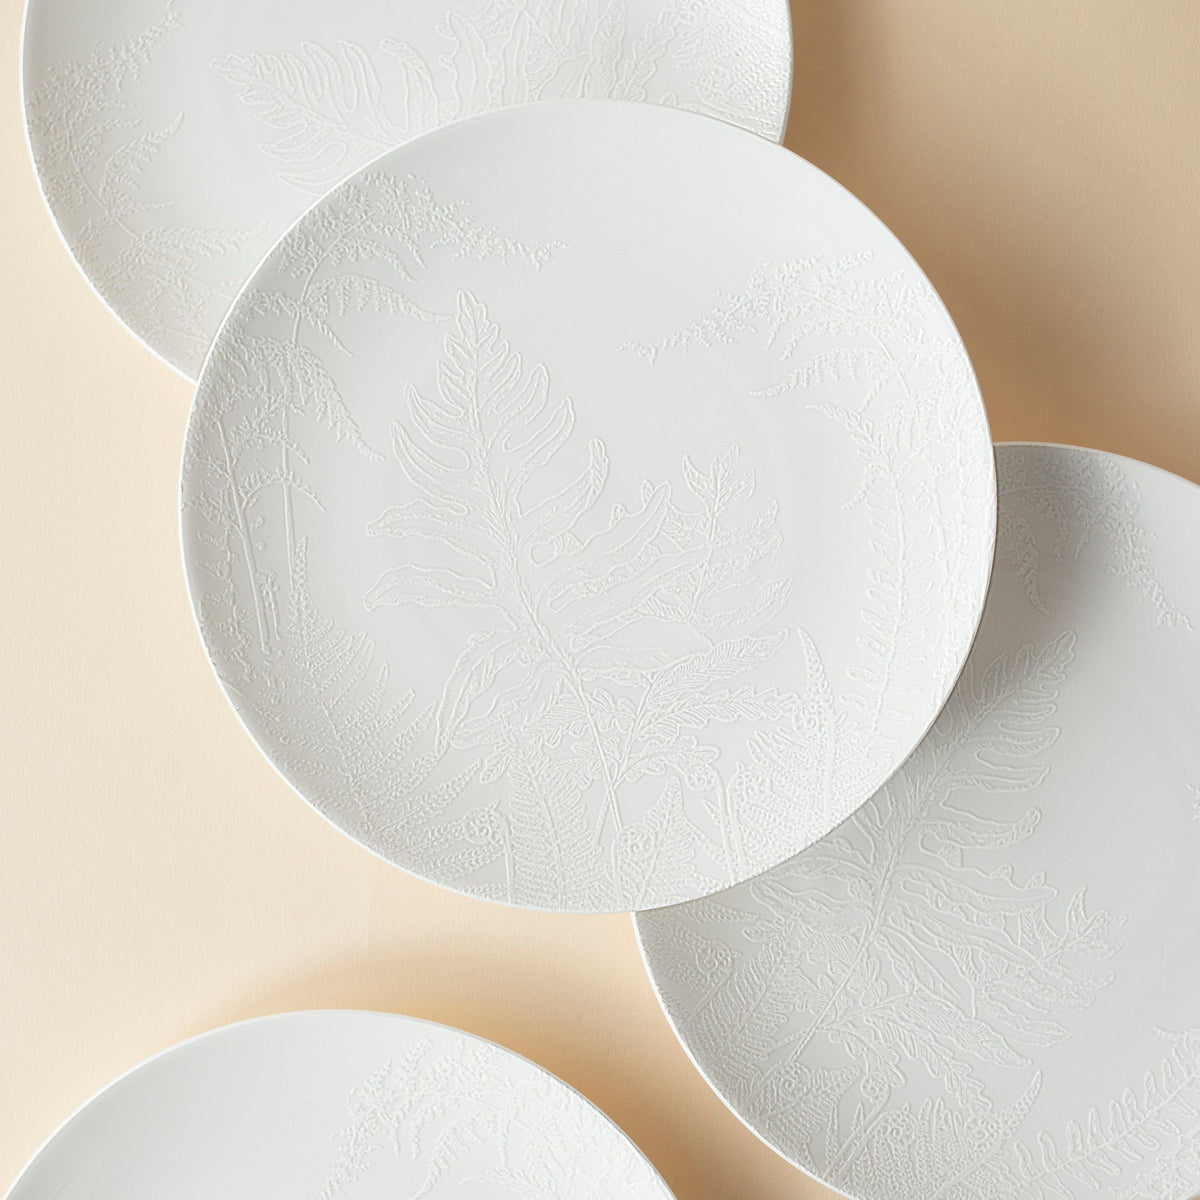 Four white porcelain plates with subtle, textured botanical patterns are displayed overlapping on a beige surface, perfect additions to your Spring collection. These are the exquisite *Spring Small Plates* from *Caskata Artisanal Home*.